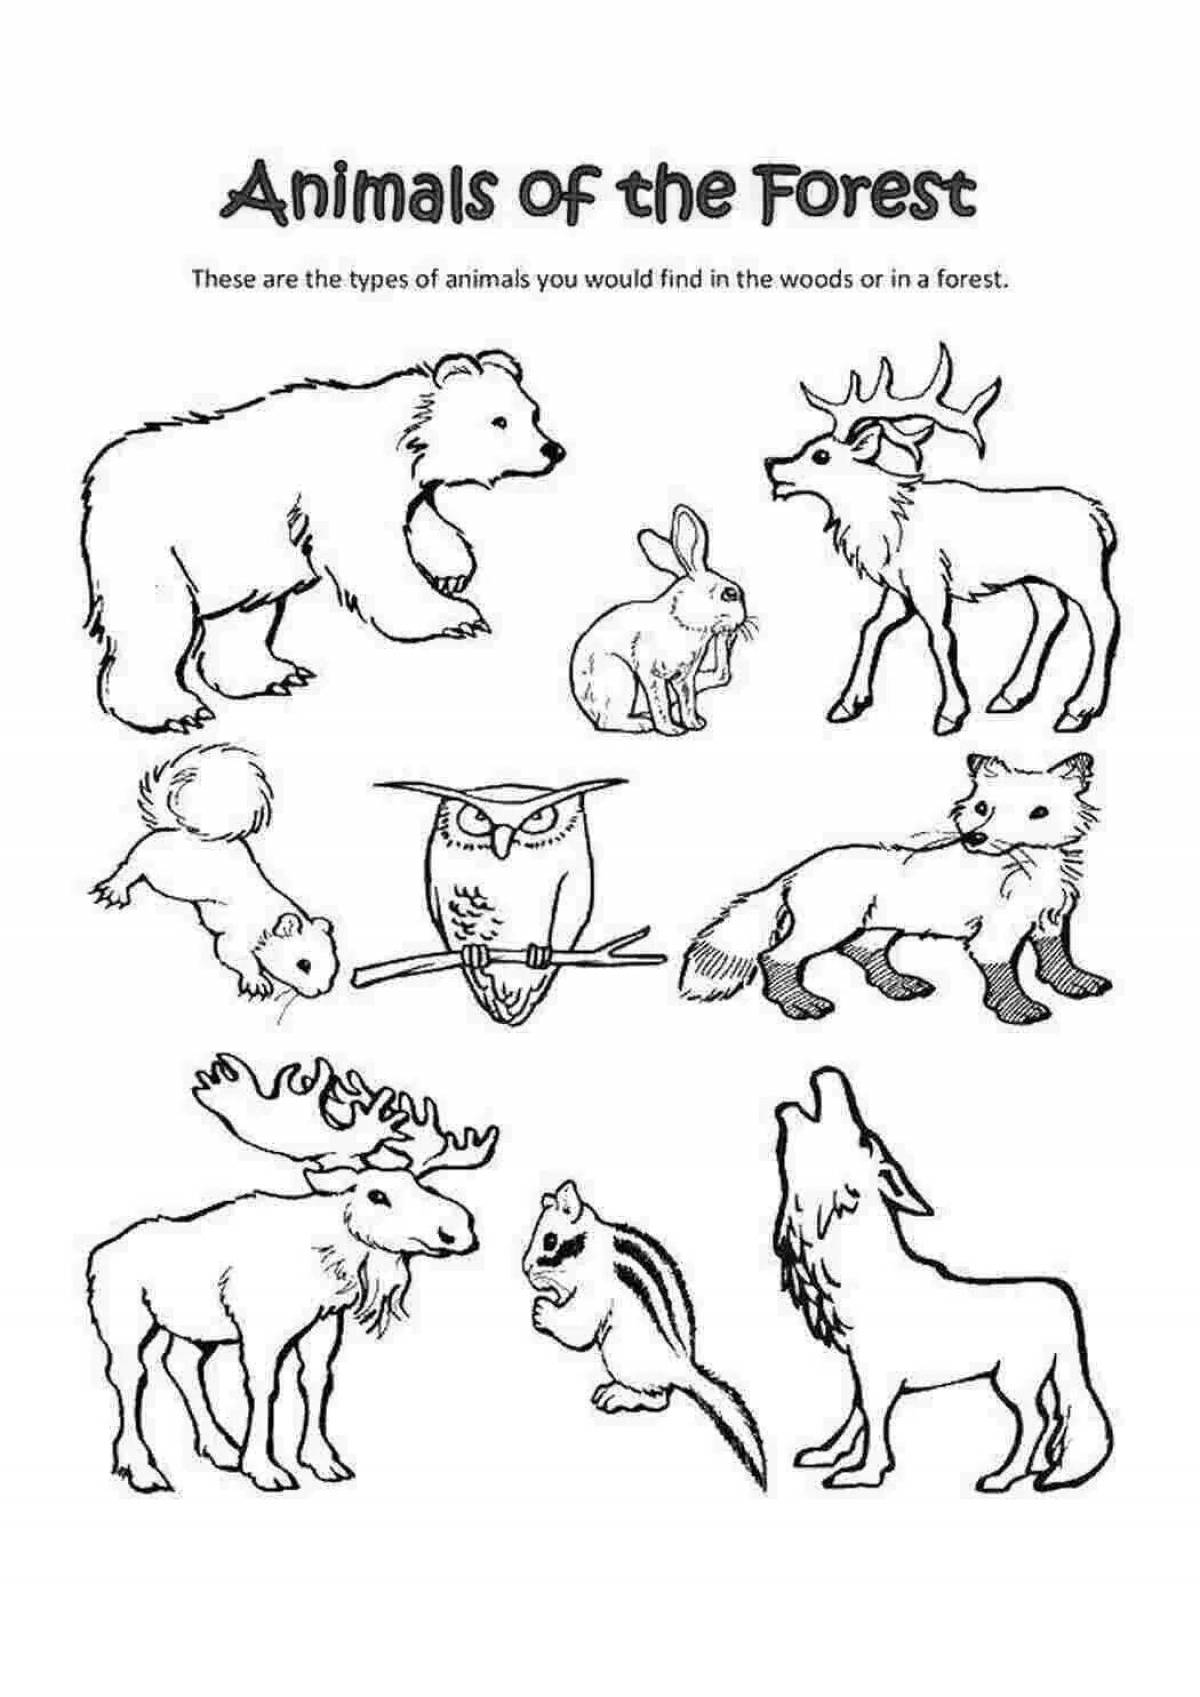 Adorable forest animals coloring book for preschoolers